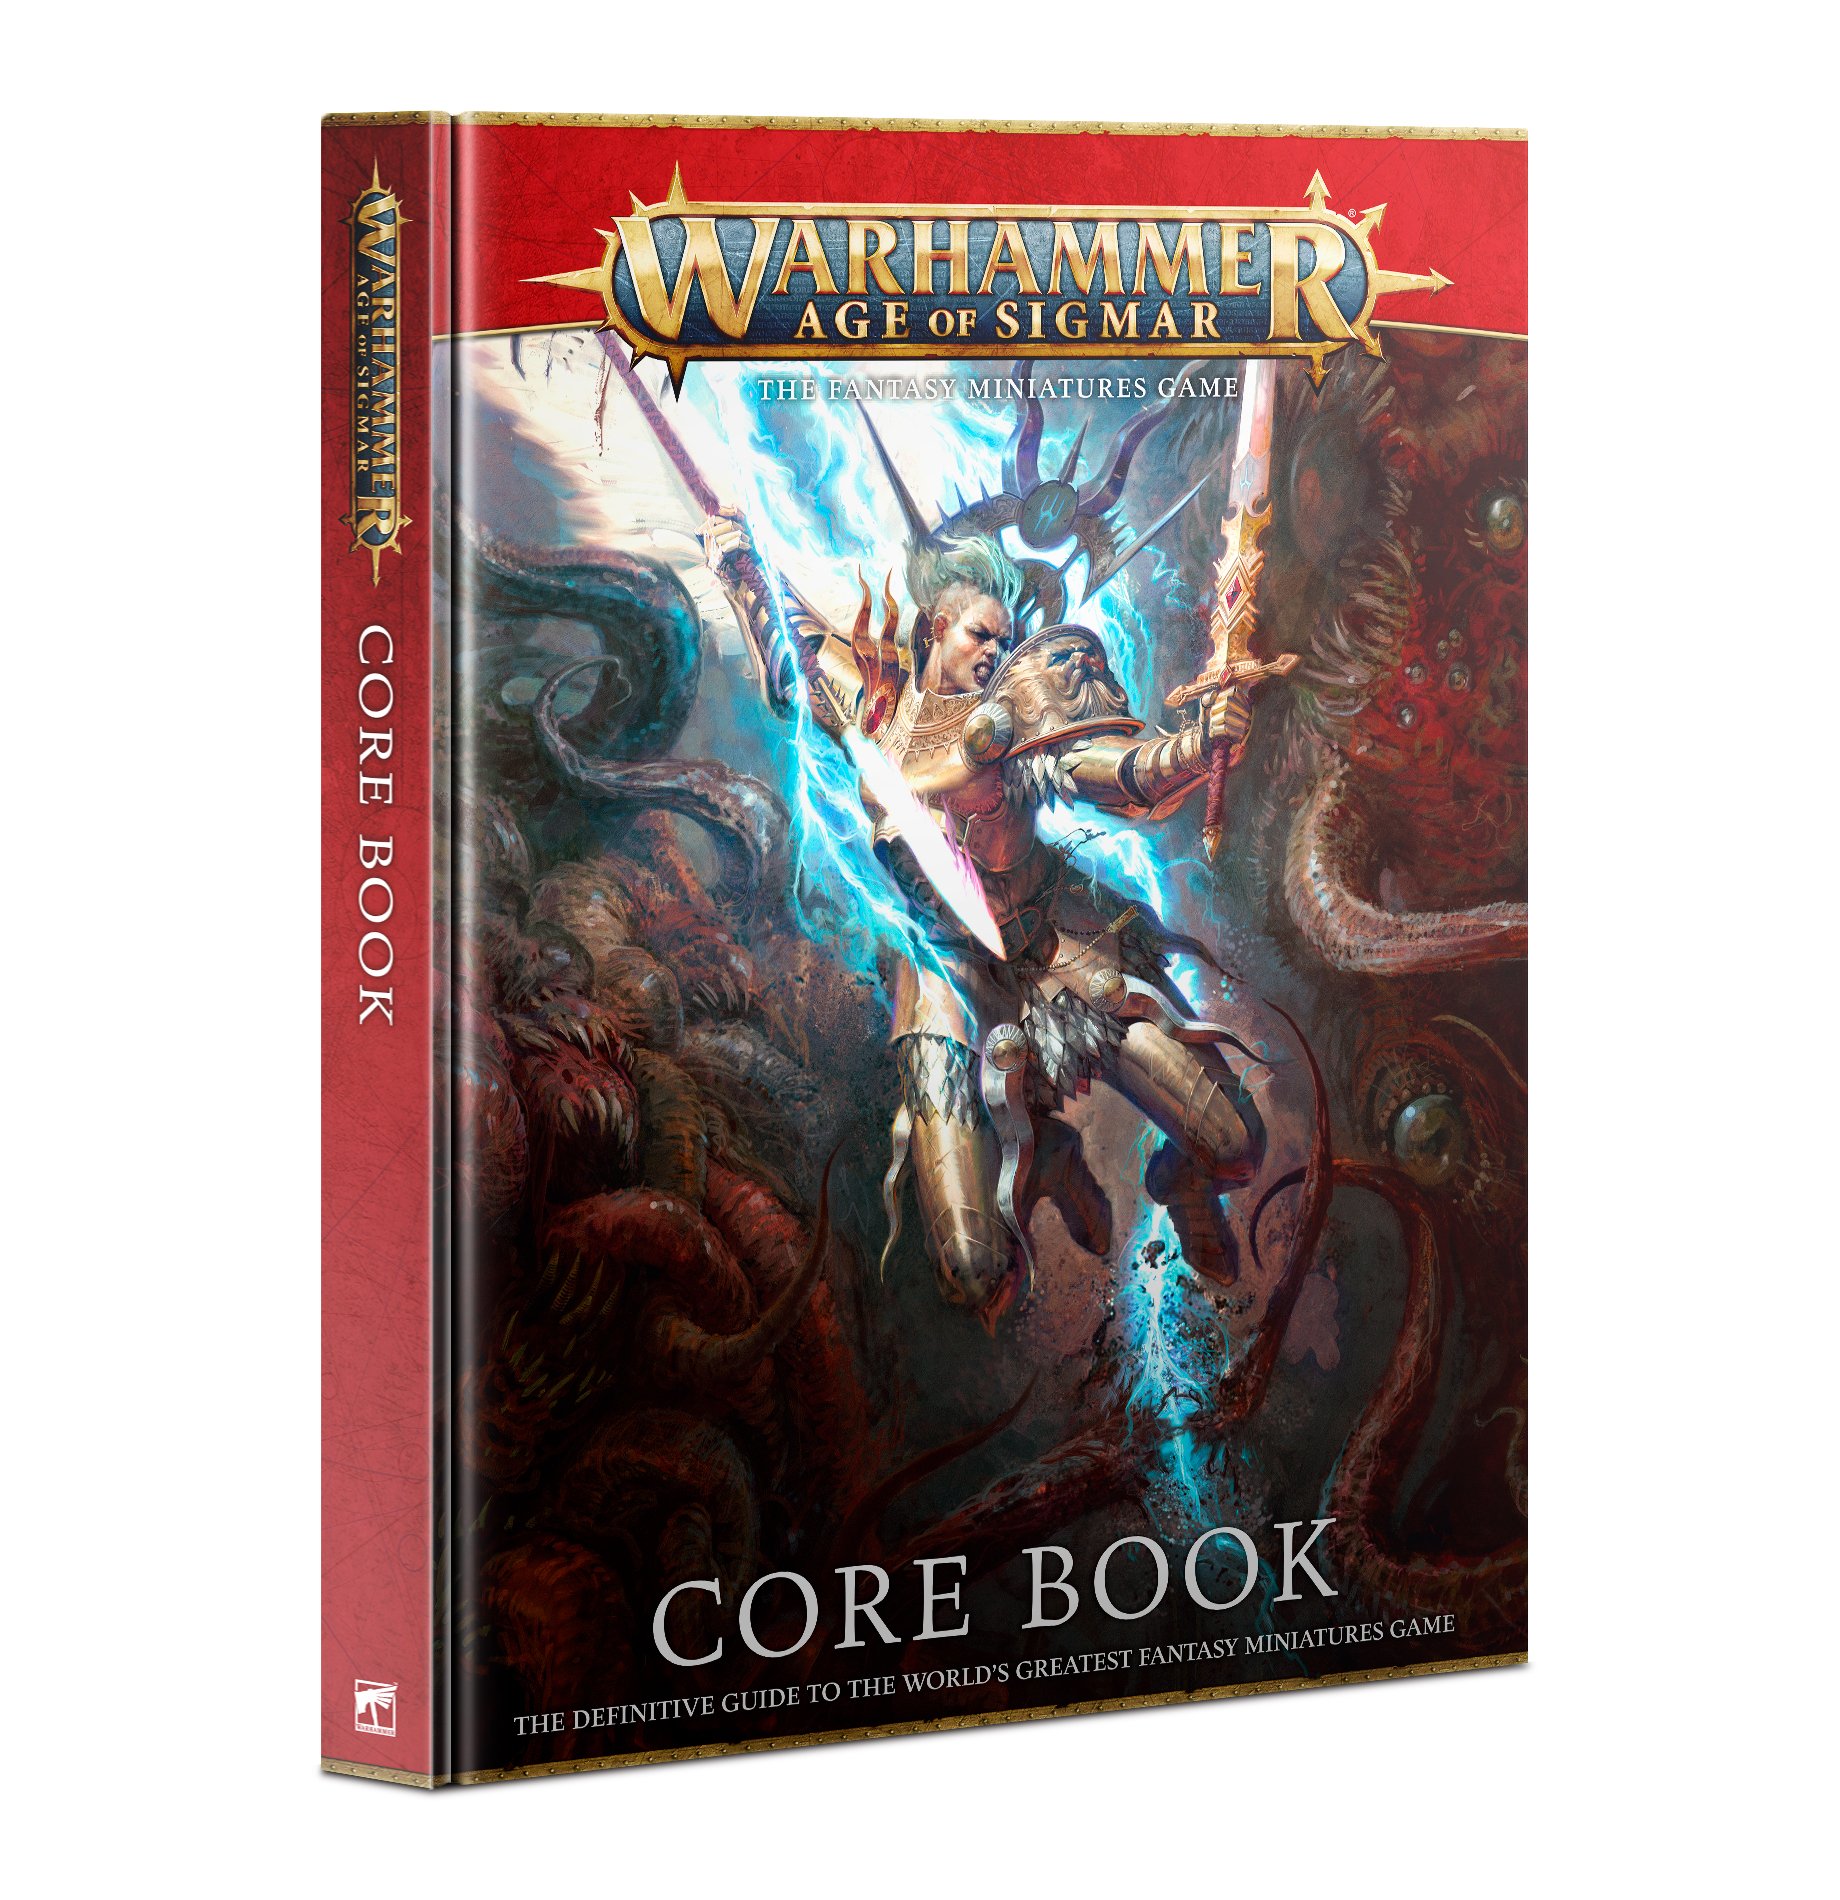 Warhammer Age of Sigmar: Core Book (3rd Edition) 